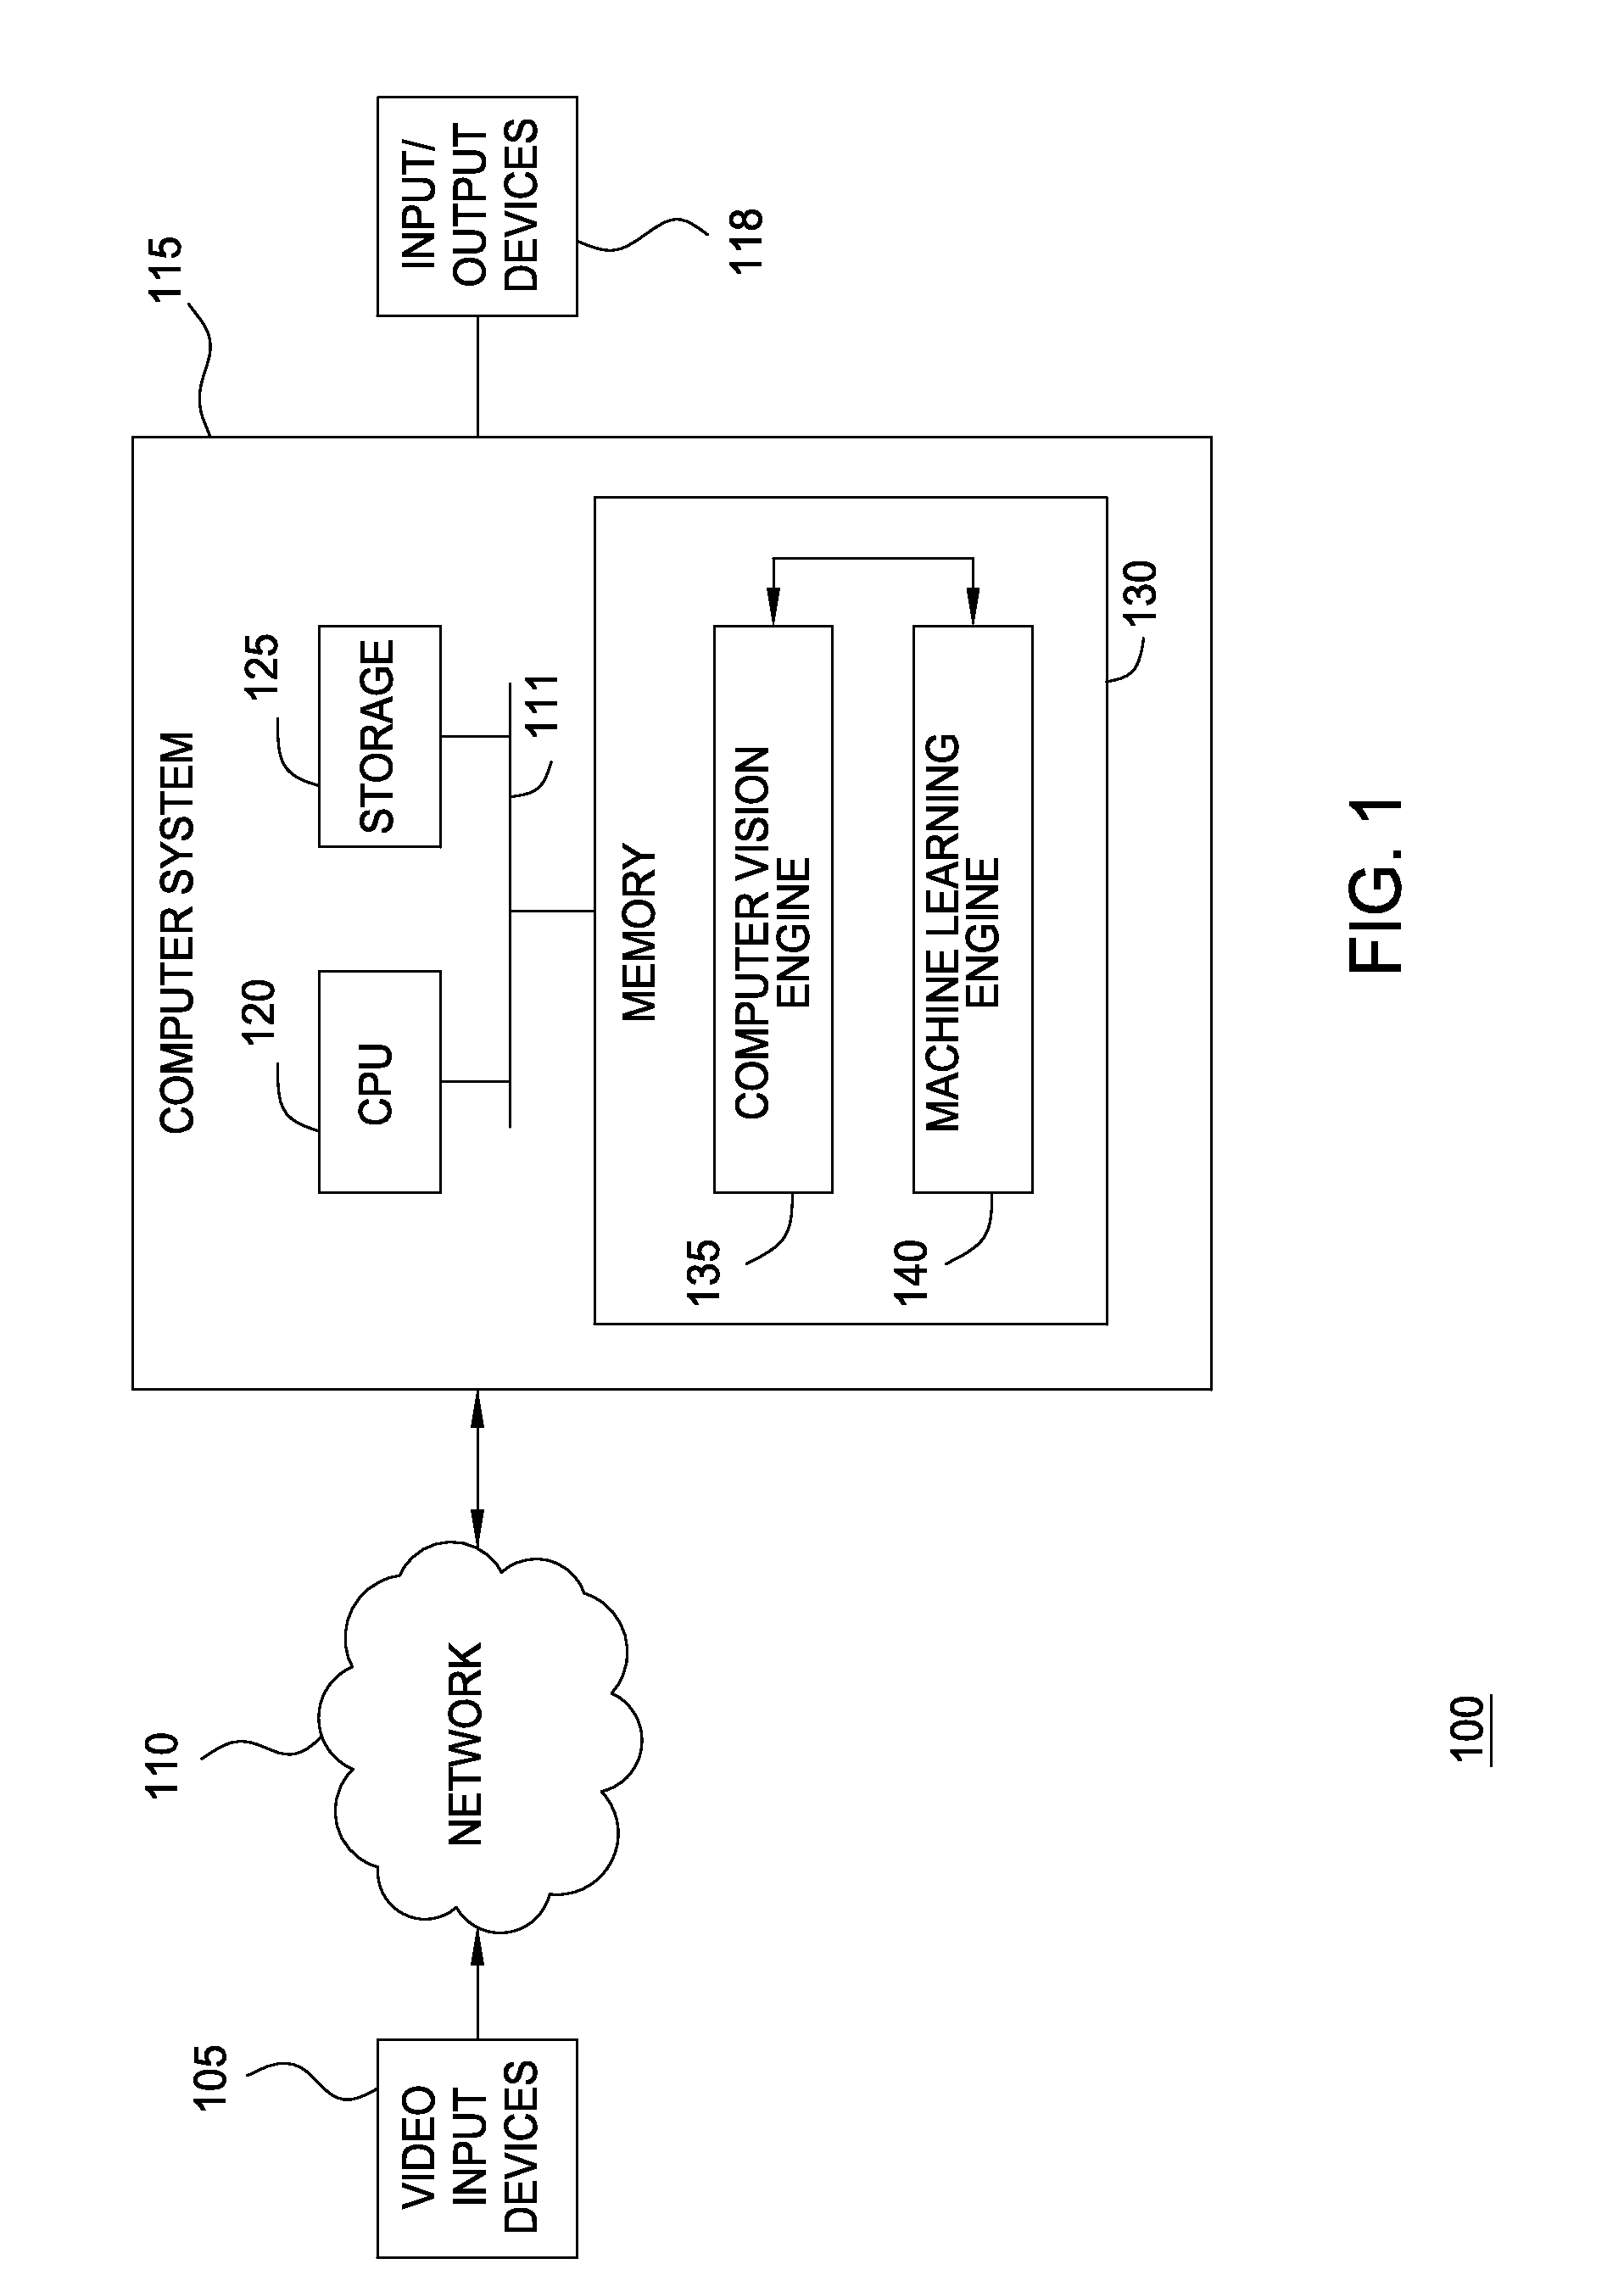 Loitering detection in a video surveillance system